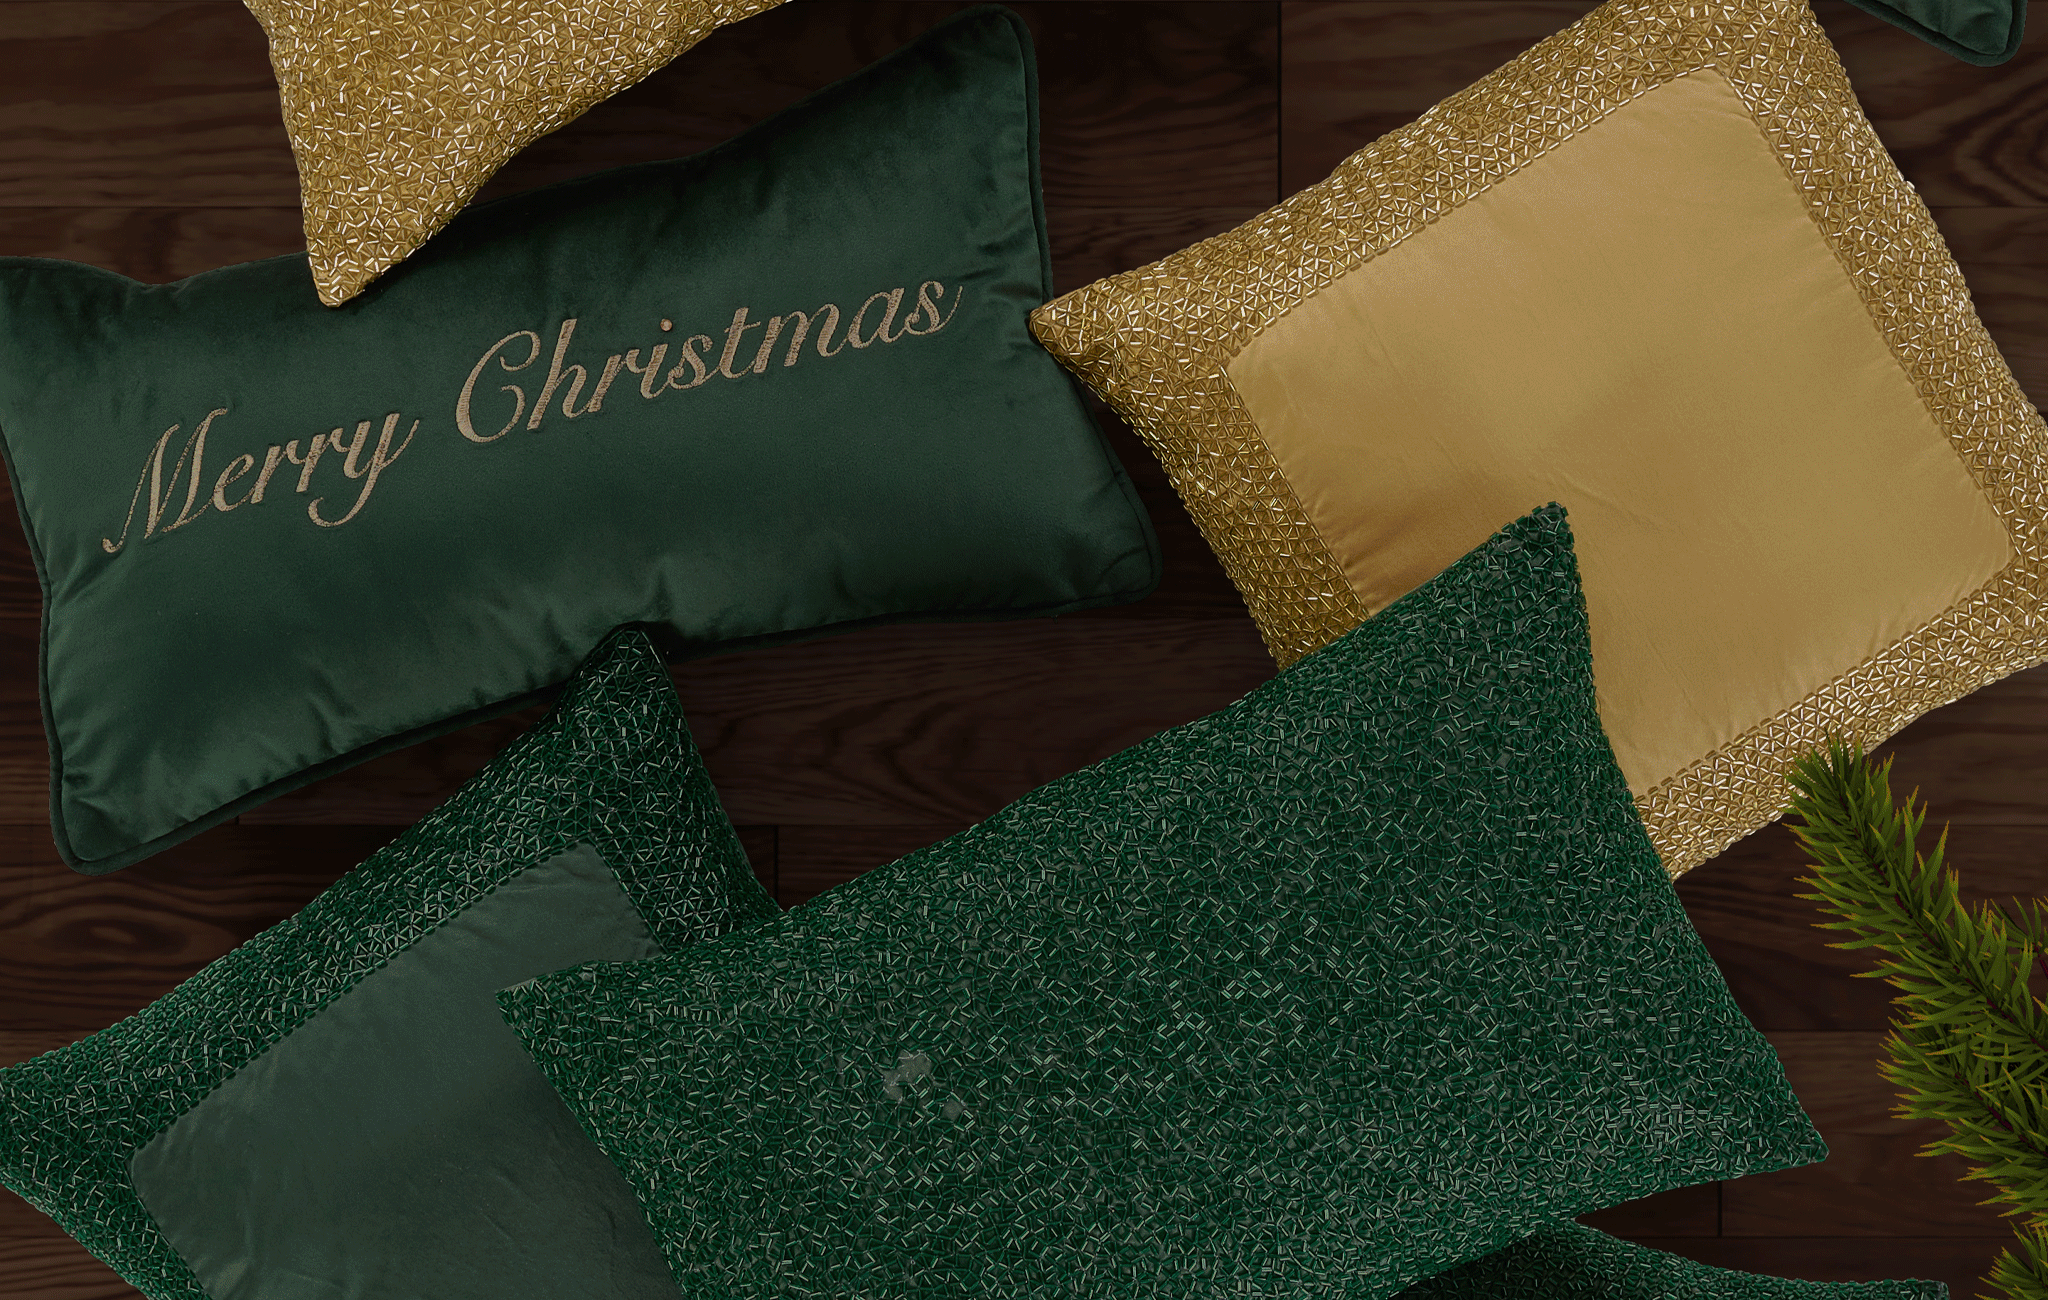 pillows decorative accessories sparkle embroidery luster luxury throws and stockings and tree skirts